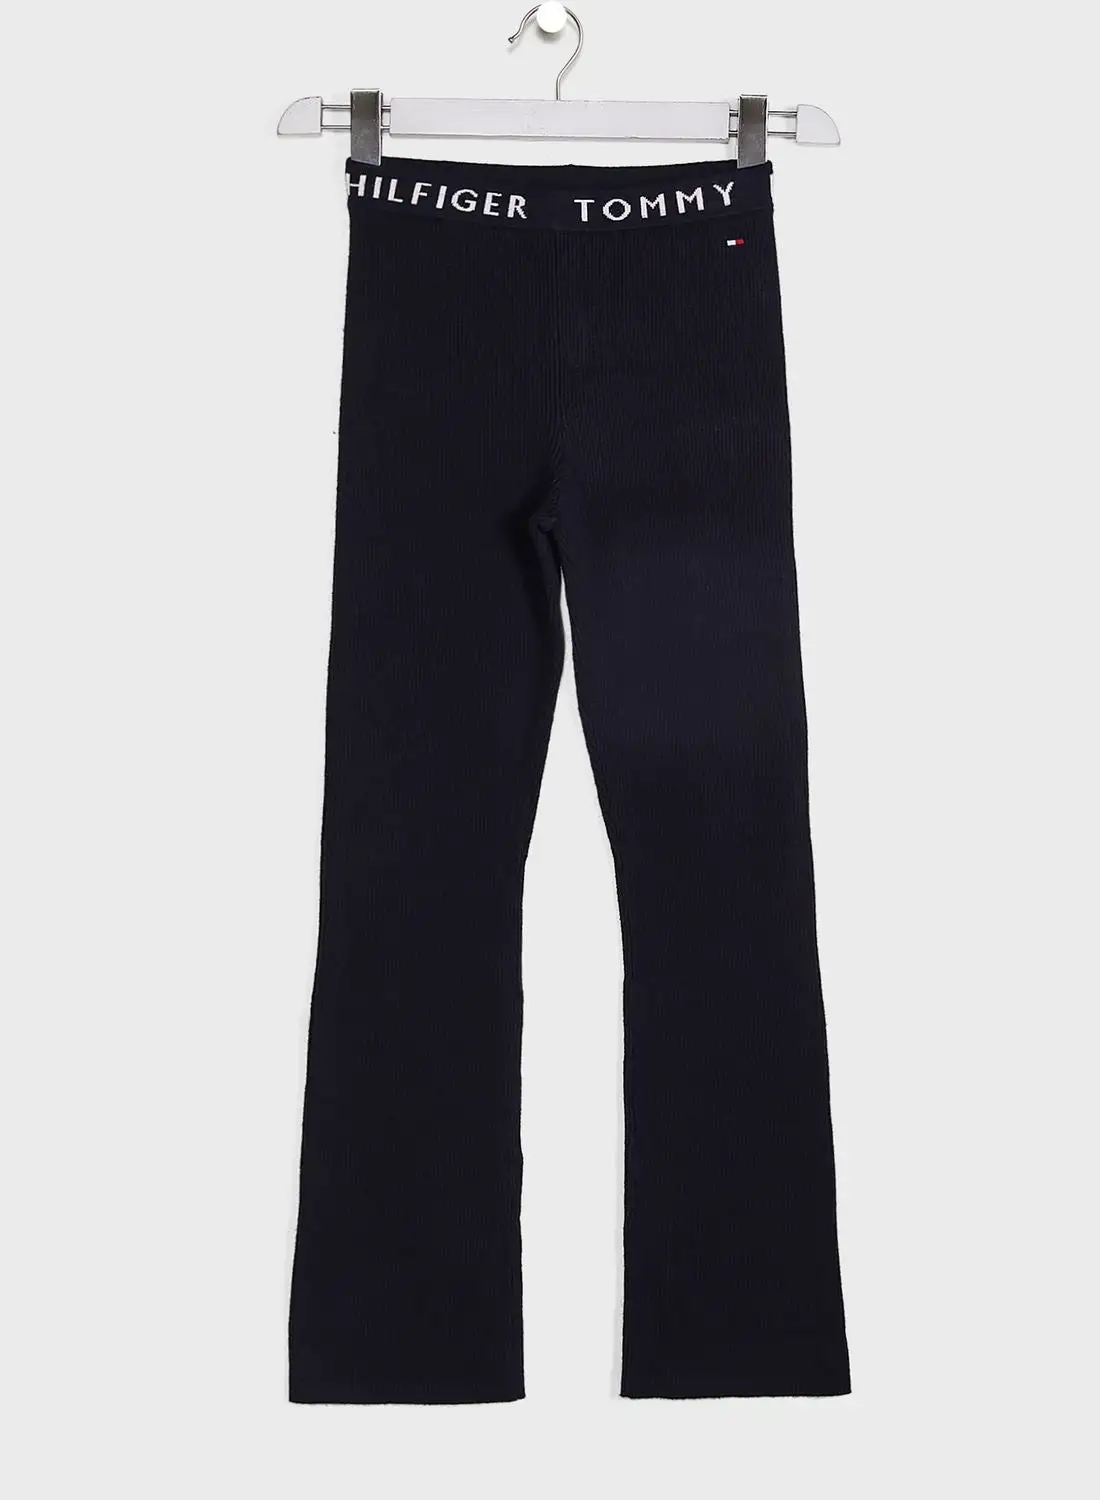 TOMMY HILFIGER Kids Essential Trousers